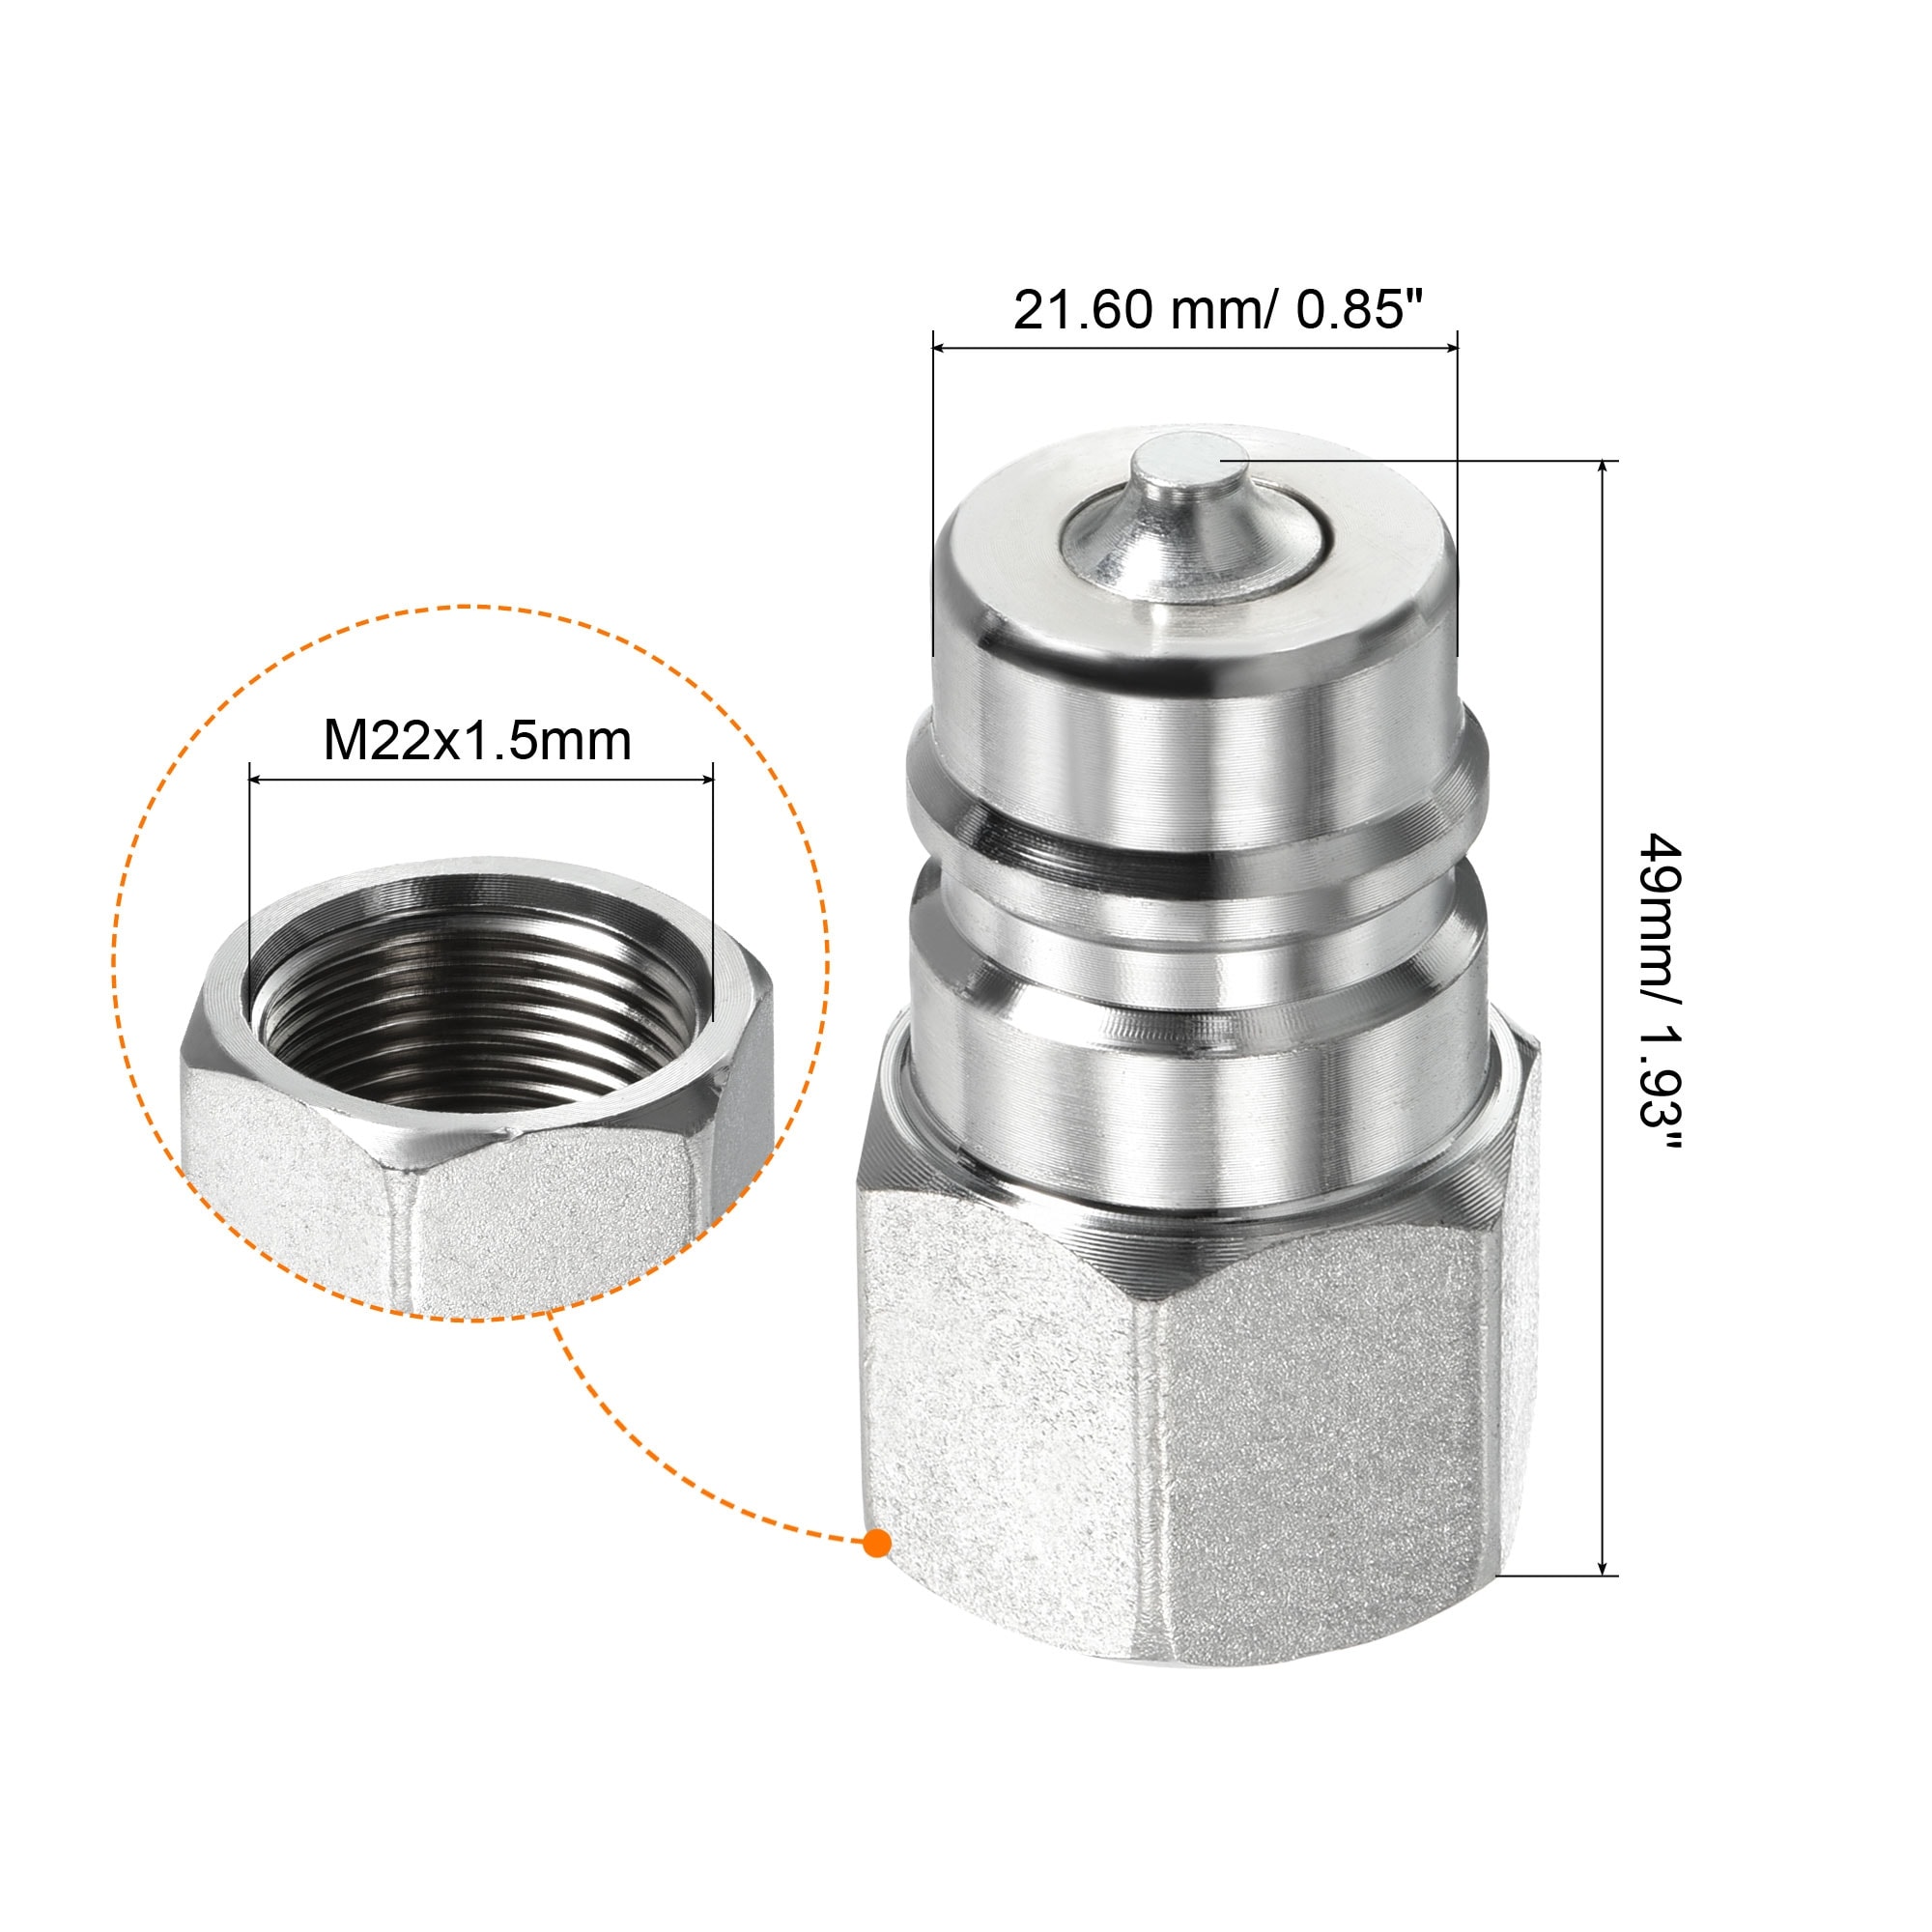 2pcs M14 x 1.5mm to M18 x 1.5mm Straight Air Pipe Fitting Connector Adapter  